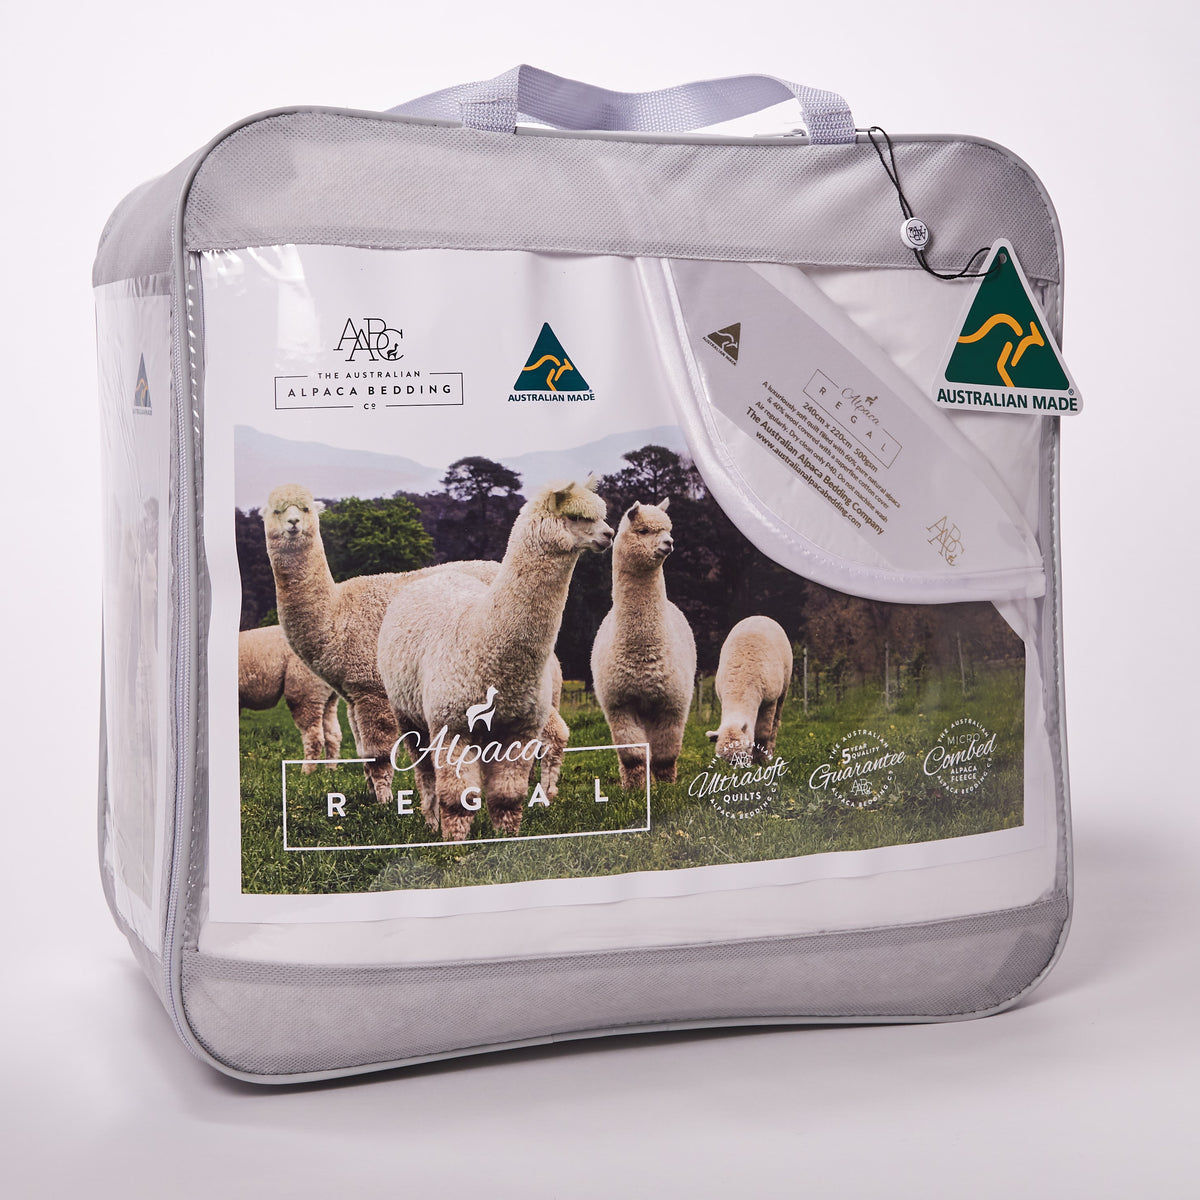 The Alpaca Regal packaging with Australian alpacas on the front insert. Soft and cute